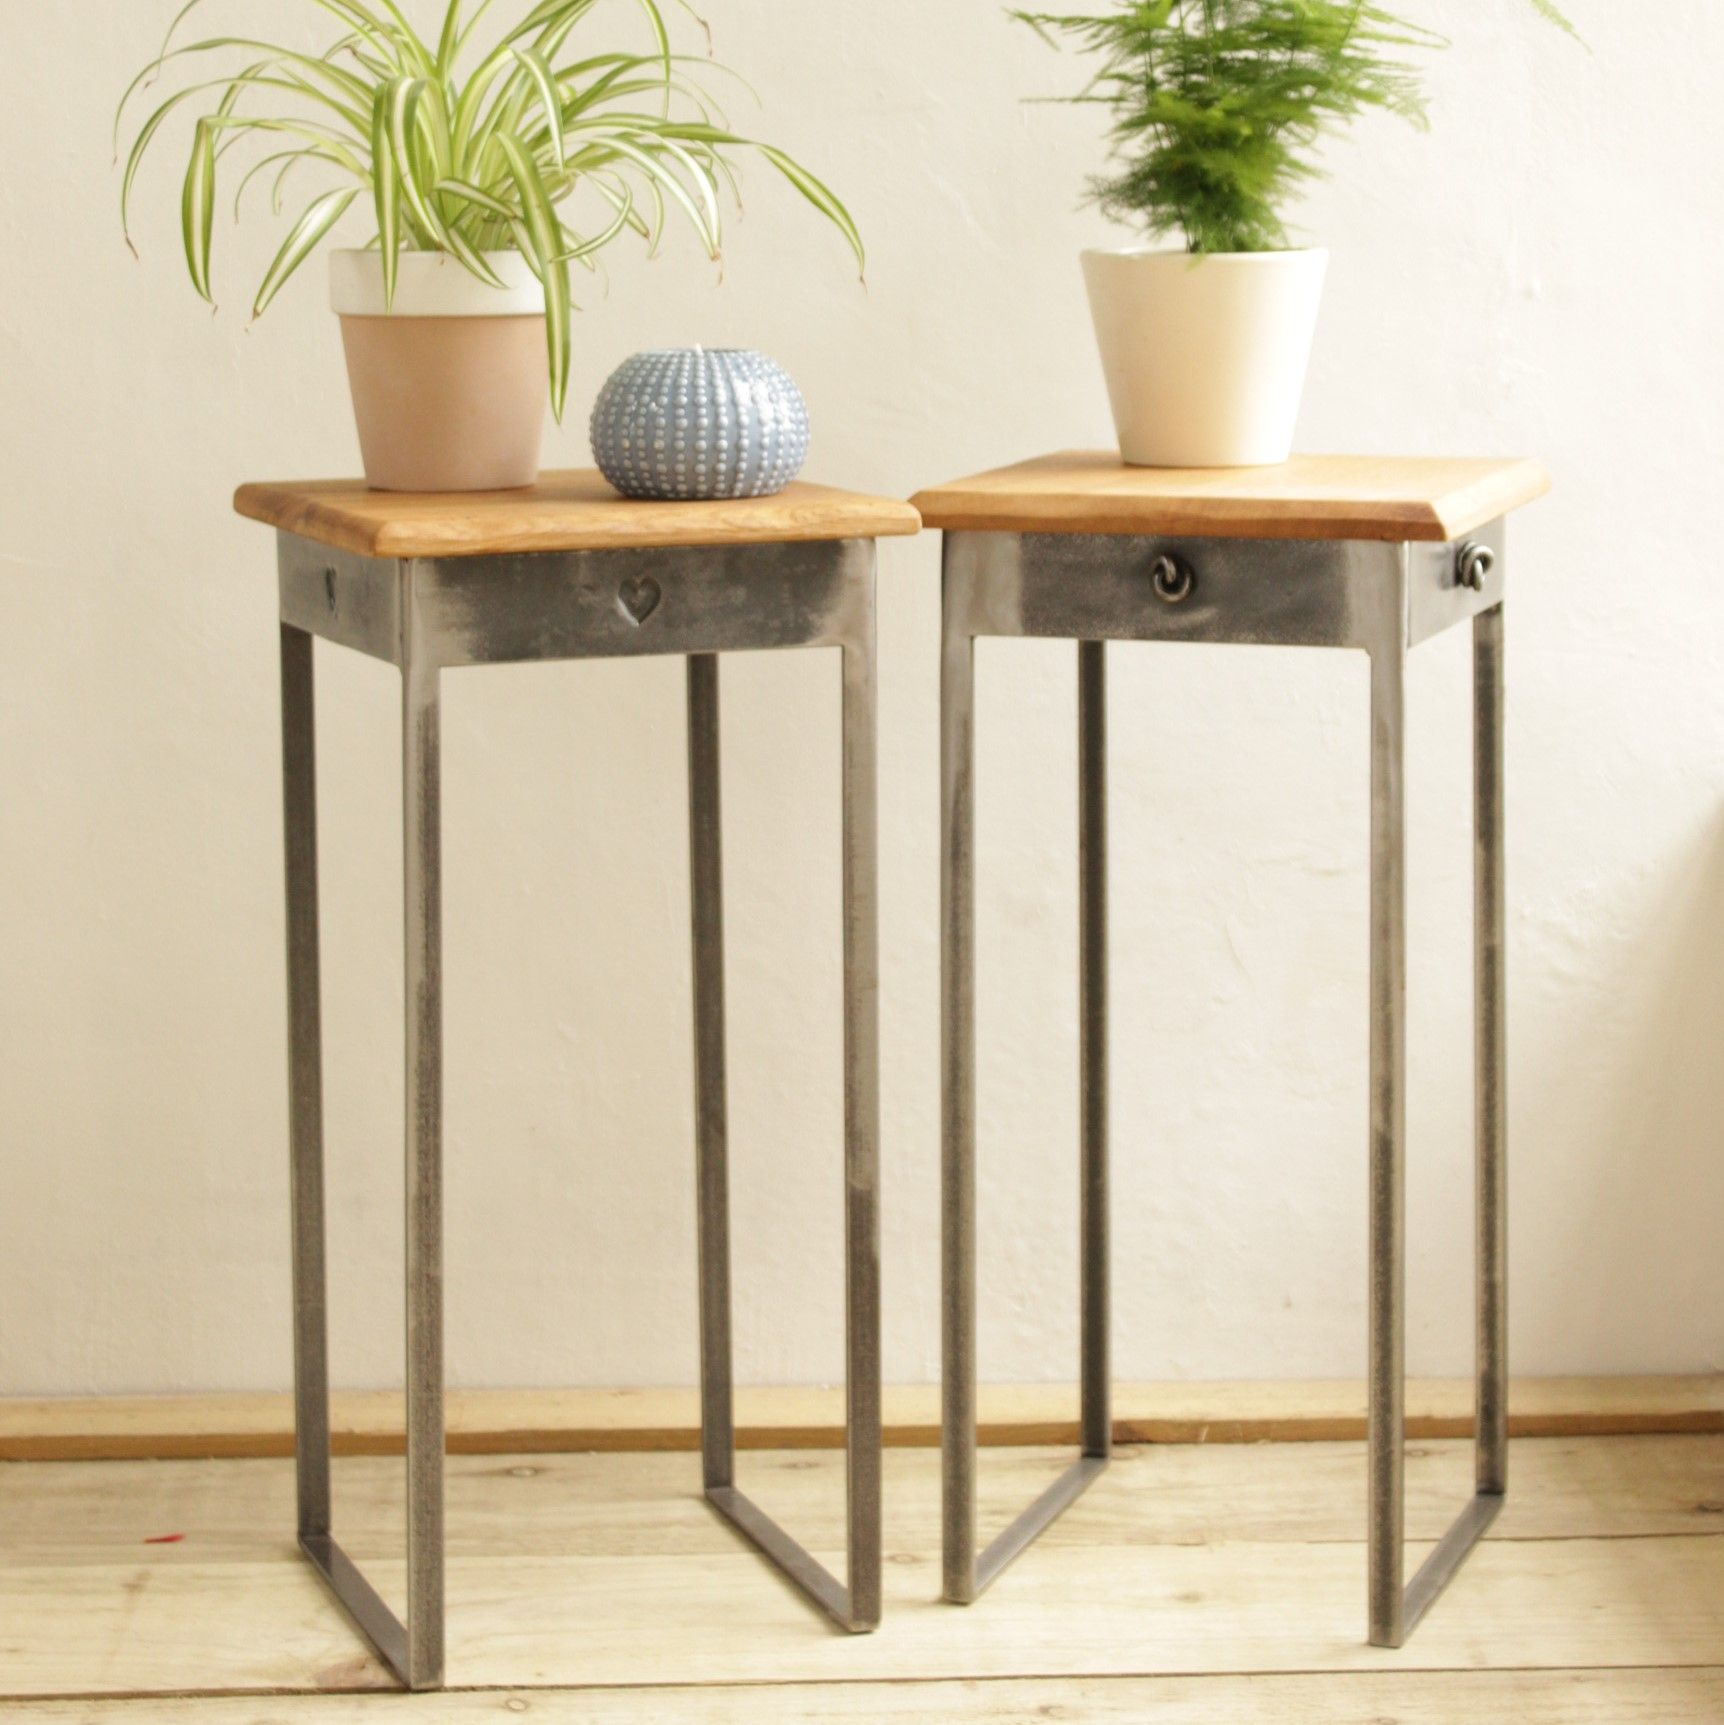 Tall Box Tables with Knots or Hearts